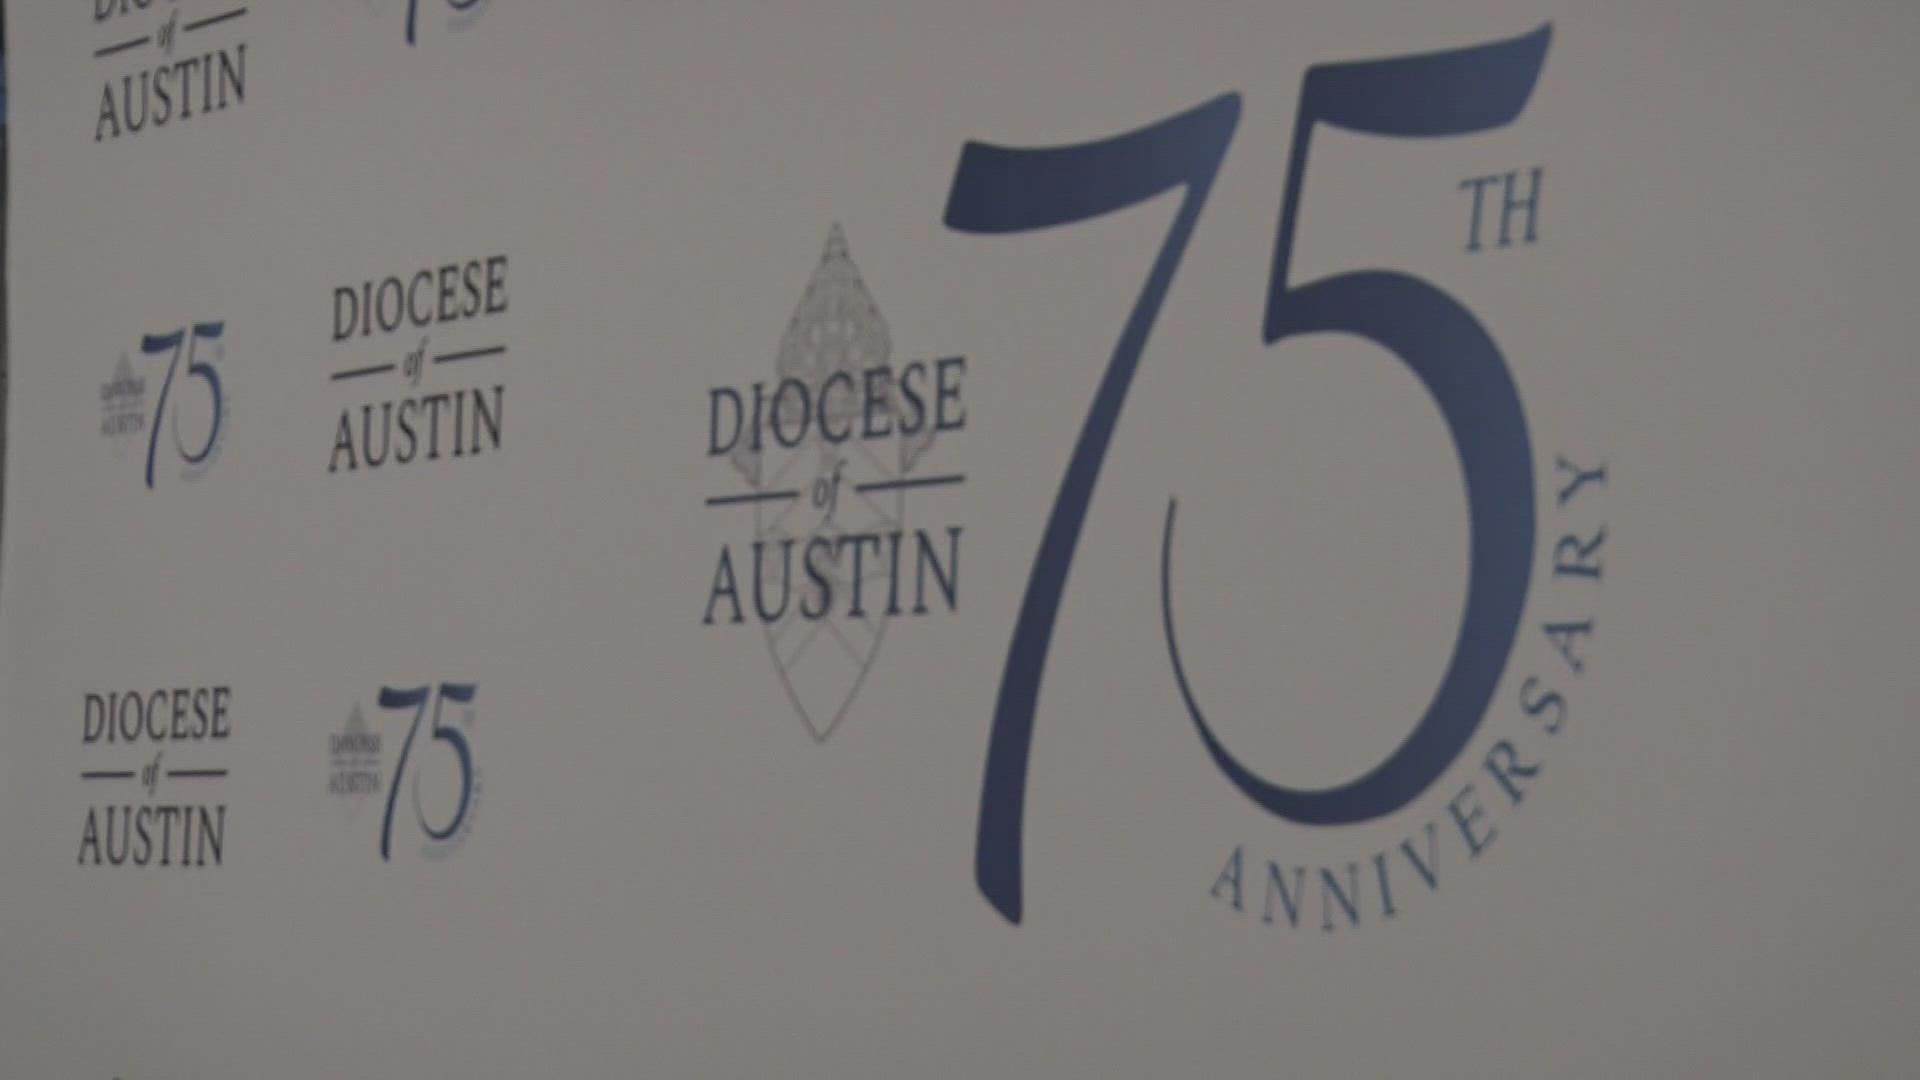 With 127 parishes in the Central Texas area, members of the Diocese of Austin gathered at the Bell County Expo Center on Nov. 19, 2022 to celebrate this milestone.